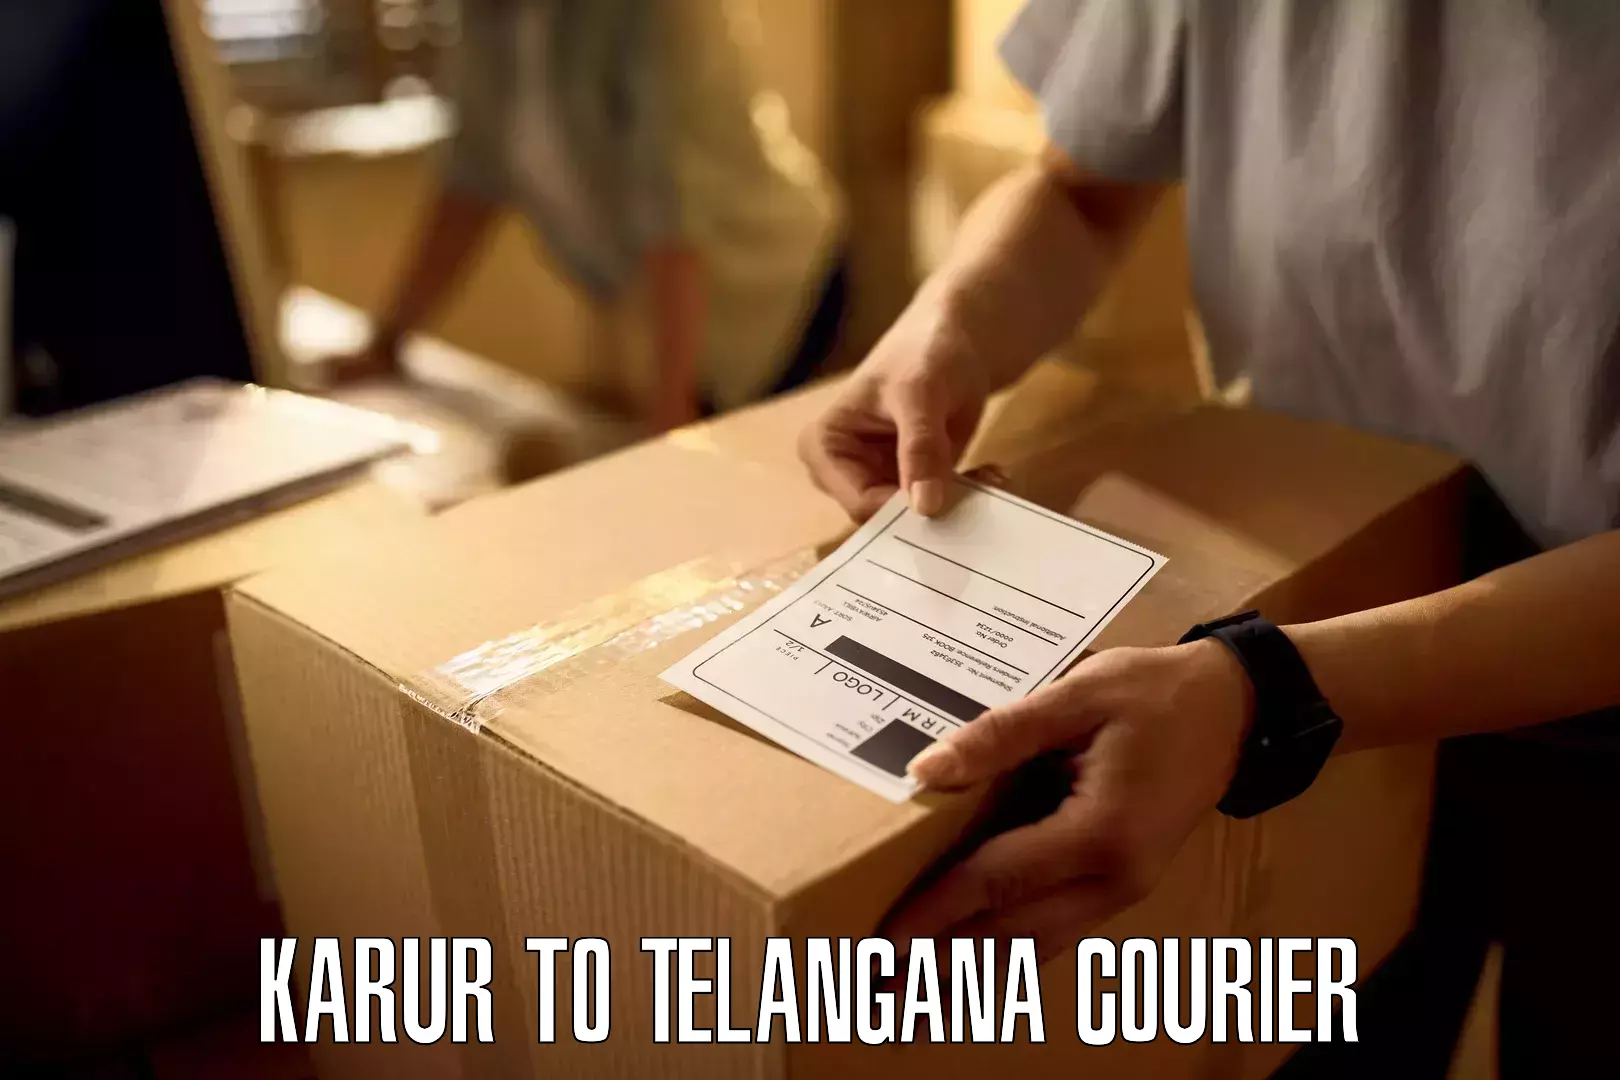 Fast delivery service Karur to Telangana